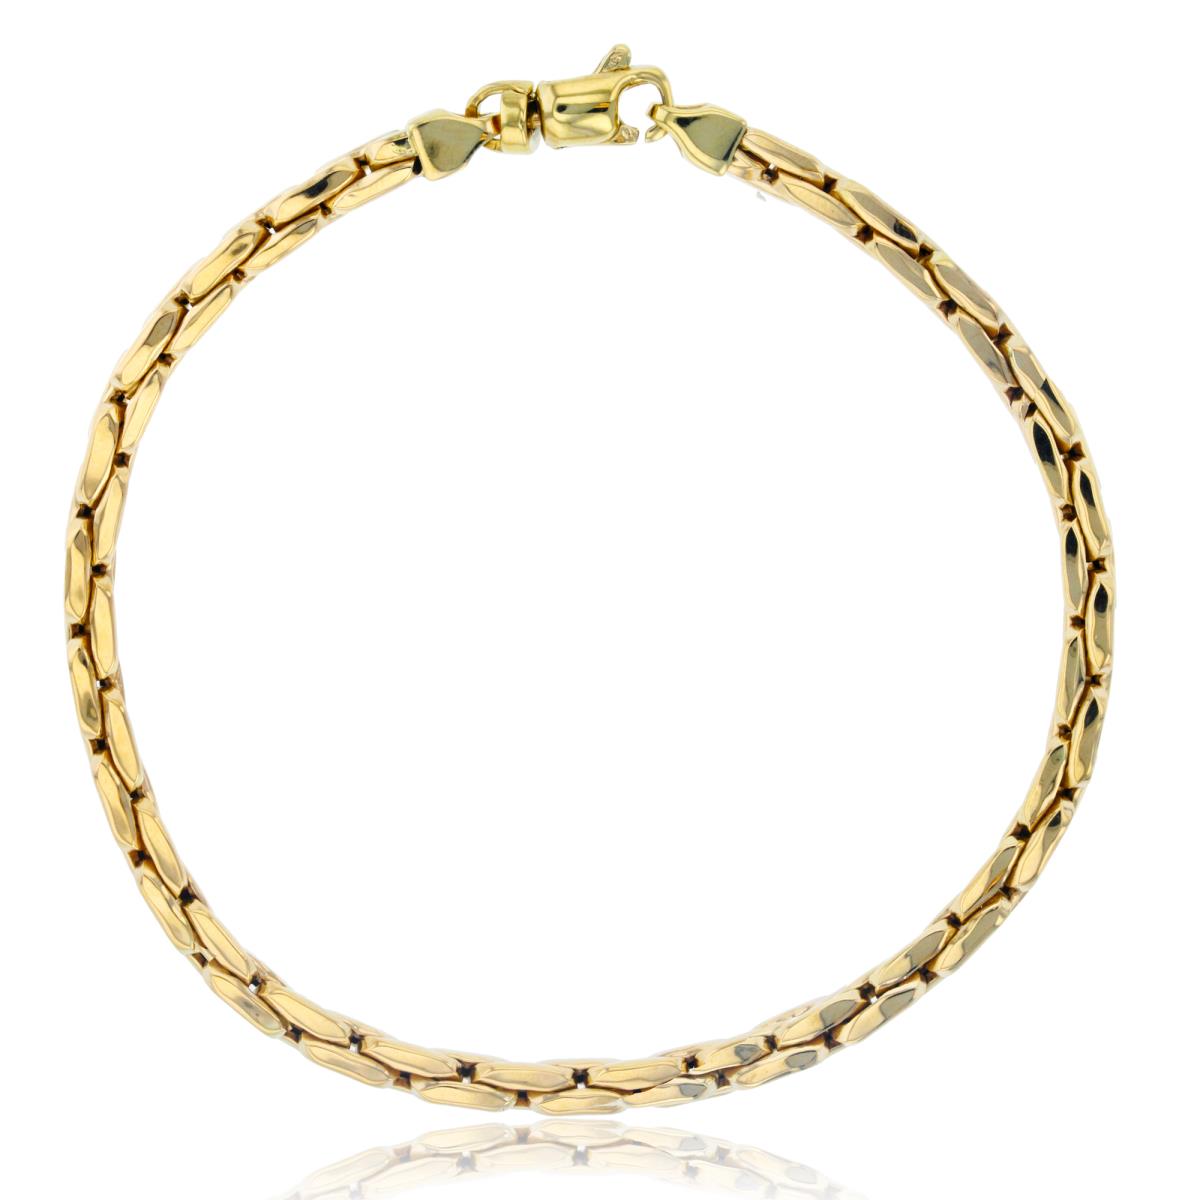 10K Yellow Gold  Fancy 4.50mm Cable 8.25" Chain Bracelet